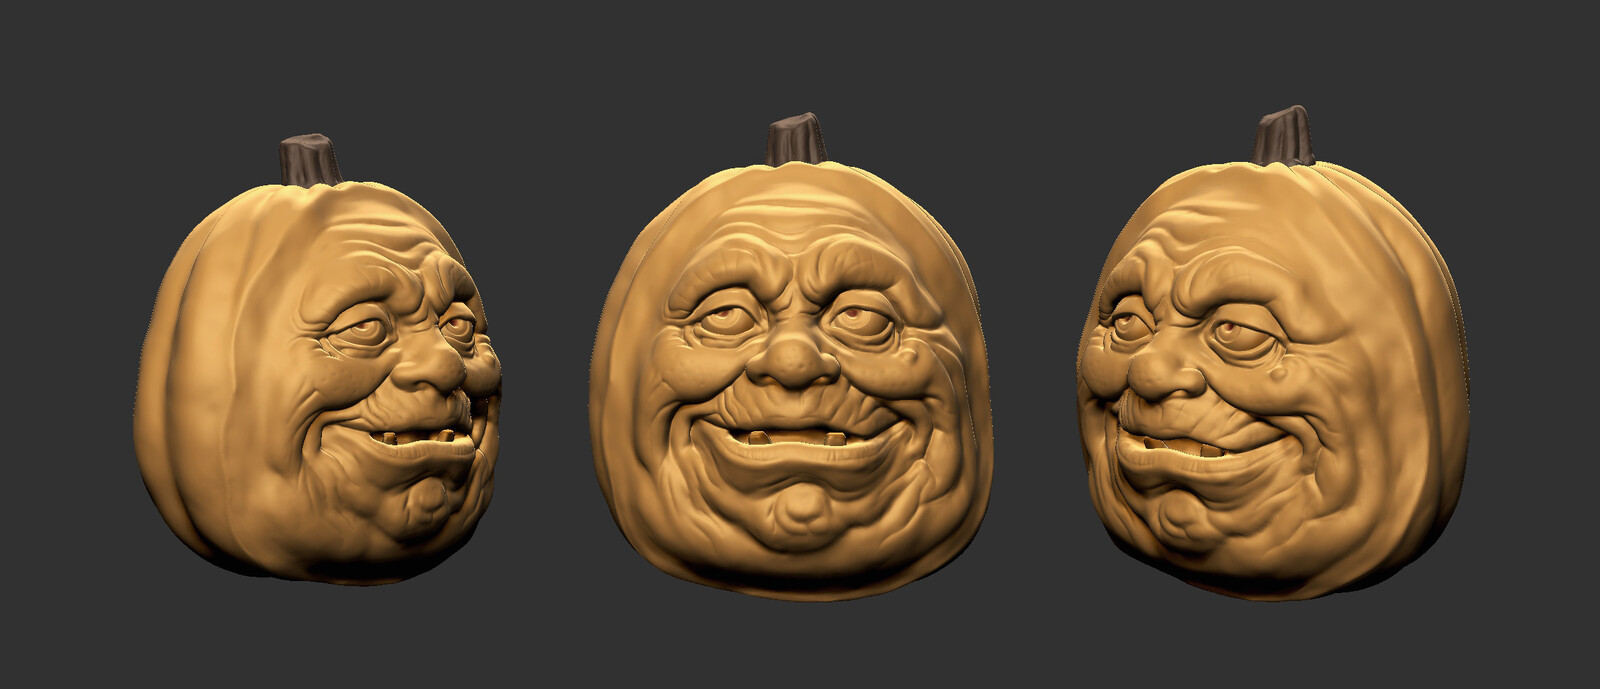 Sculpt practice for better understanding the first, secondary, third shapes of an object.